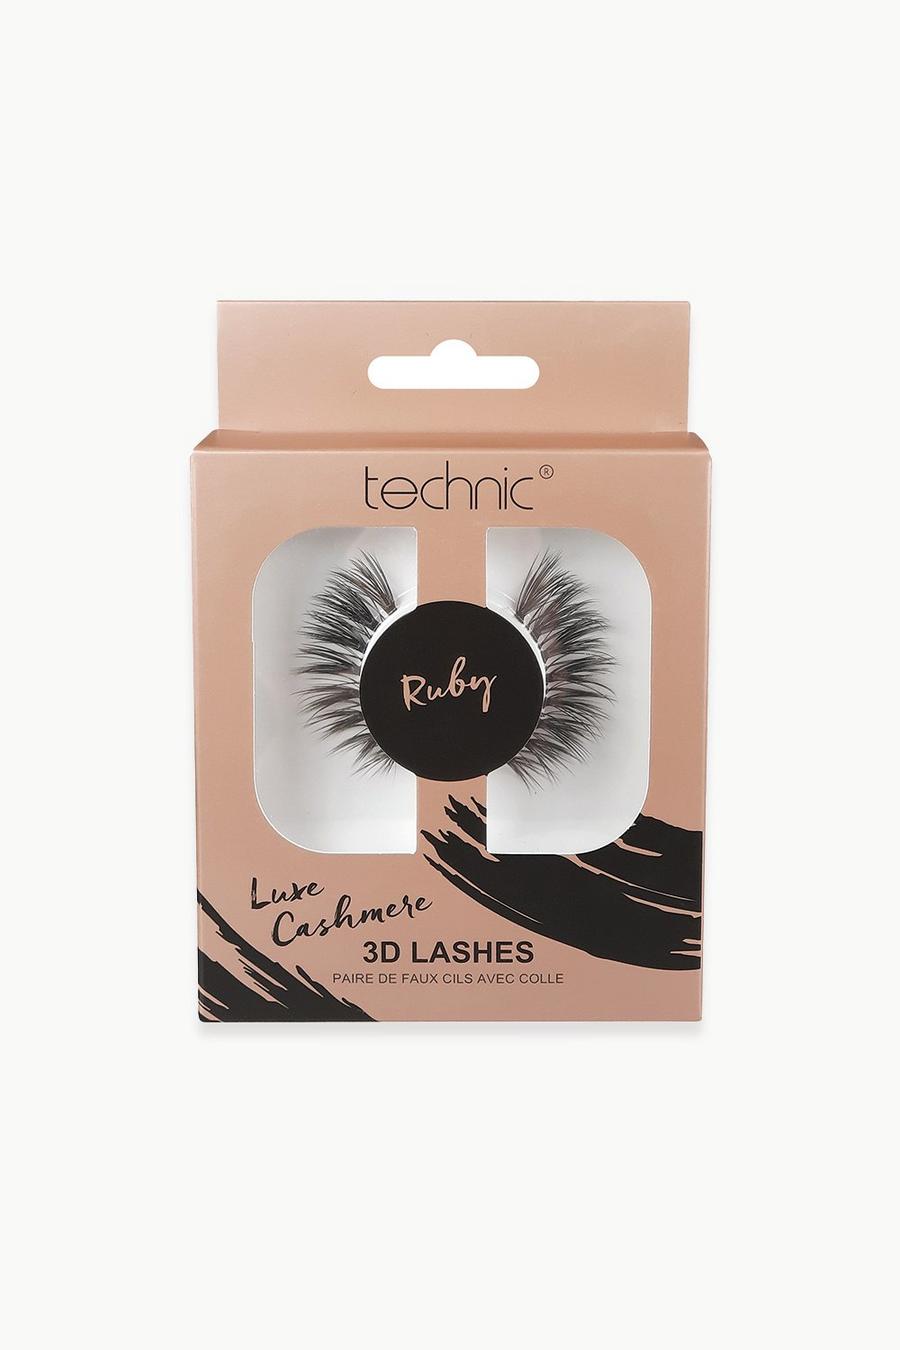 Technic Luxe Cashmere Wimpern - Ruby, Black schwarz image number 1